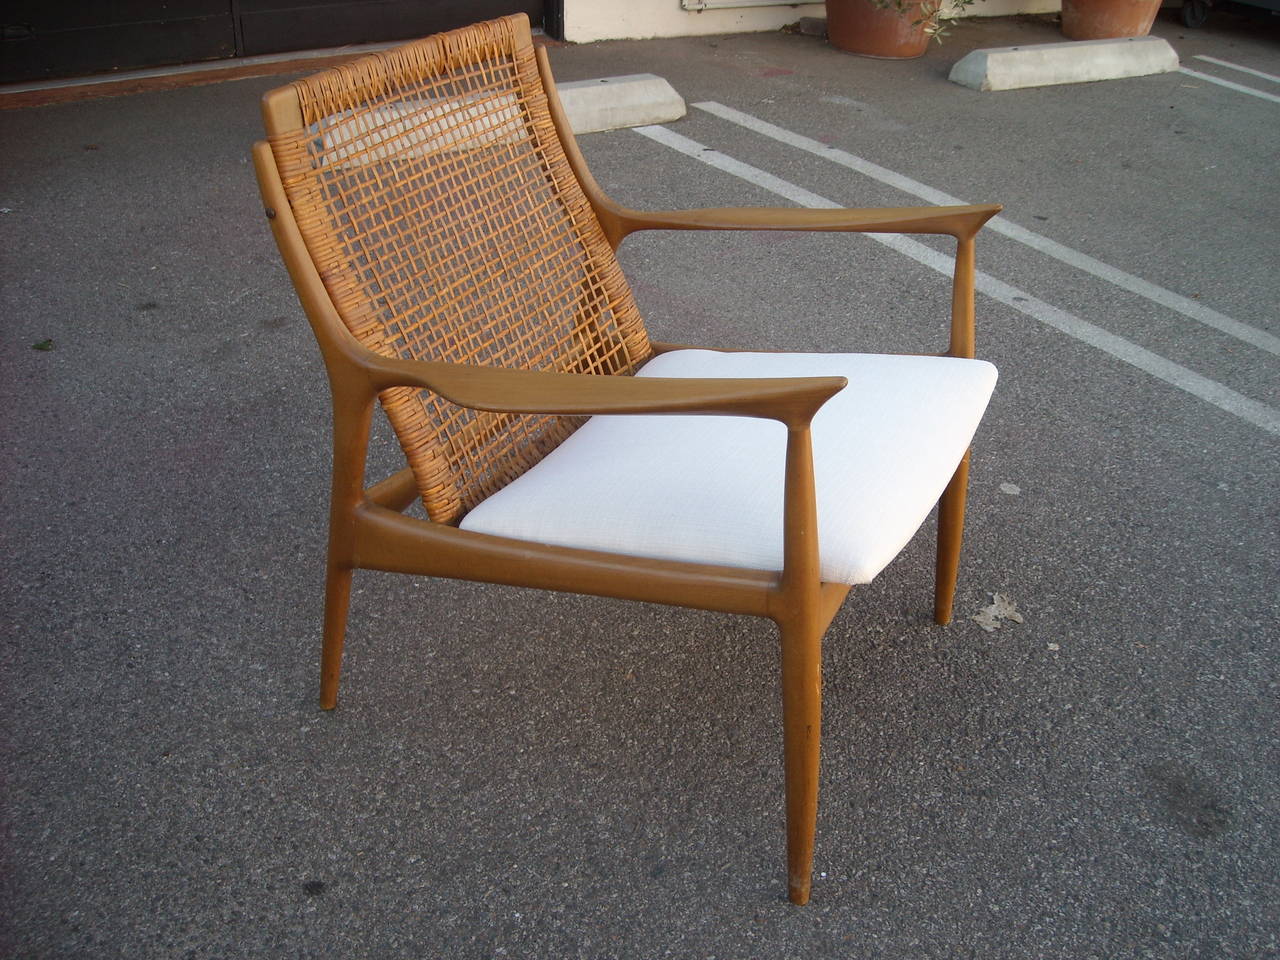 Nice and elegant lines in this caned back chair. Just amazing and great modern lines. The chair has bean cleaned and new synthetic silk seat, some repairs and light scratches.